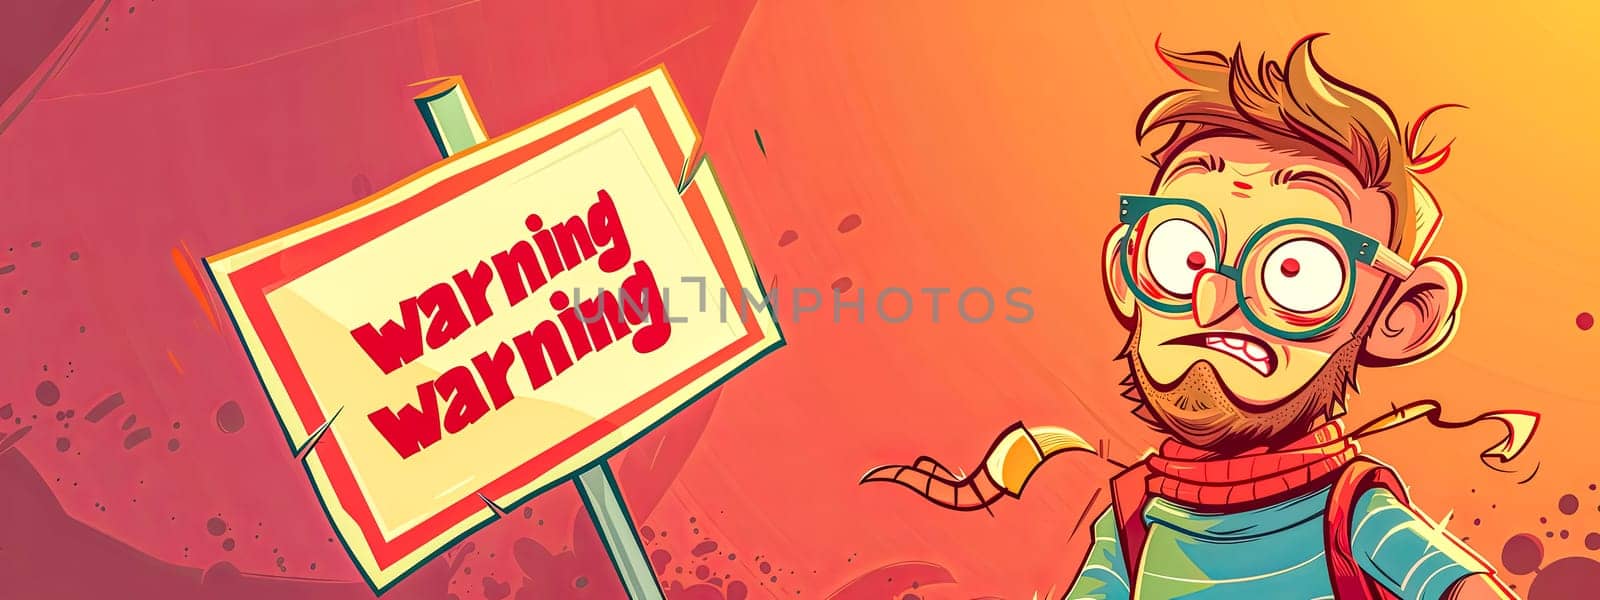 Quirky scientist with warning sign cartoon illustration by Edophoto